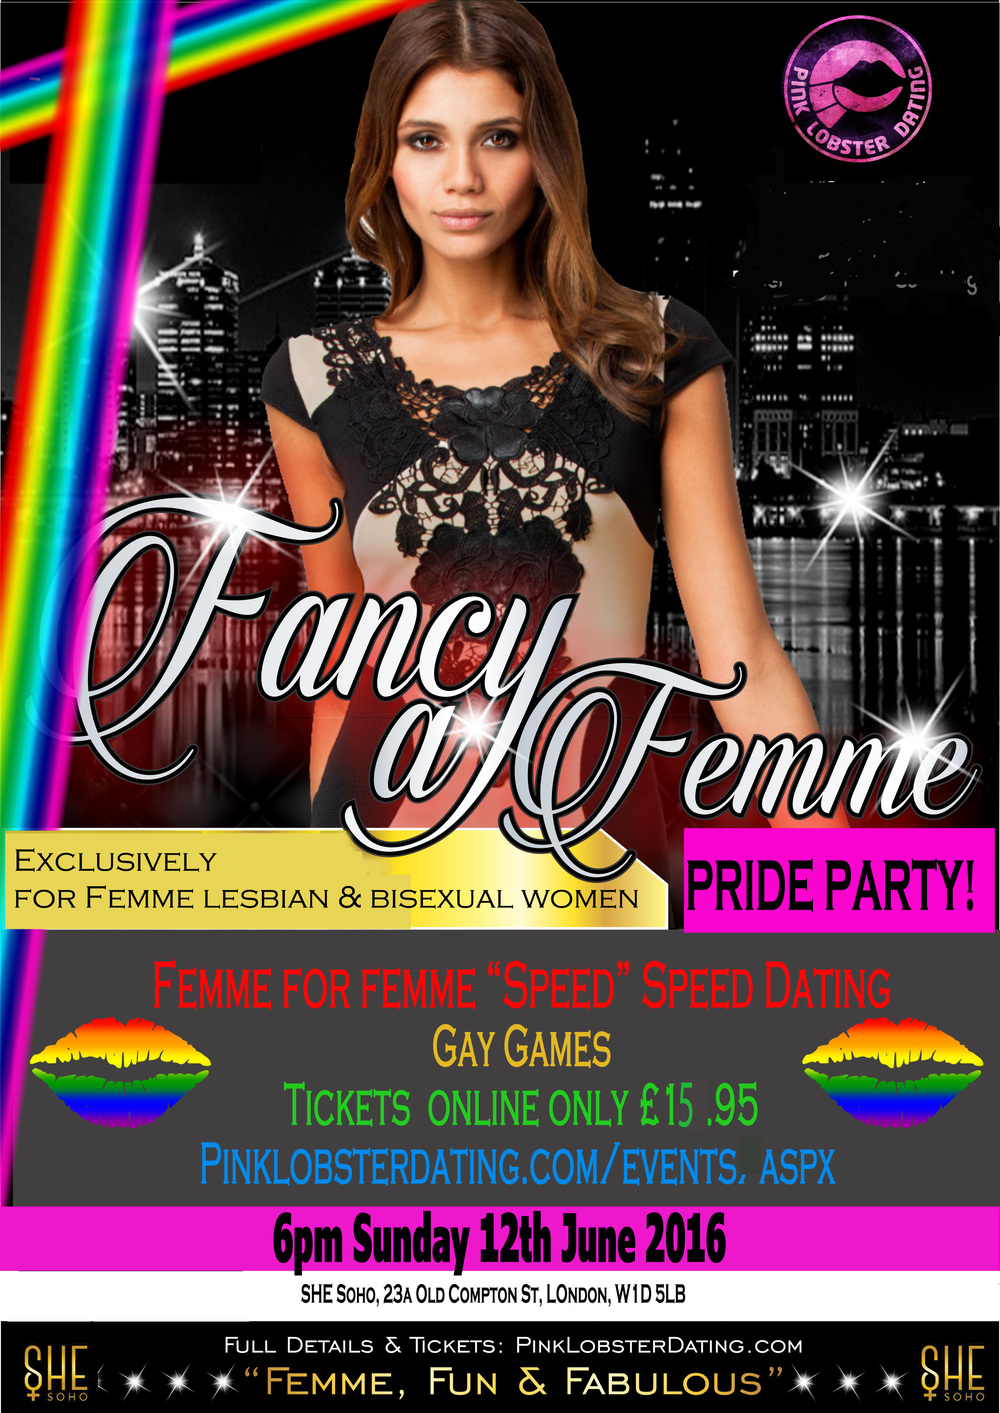 Fancy a femme London Pride party for lesbians and bisexuals 